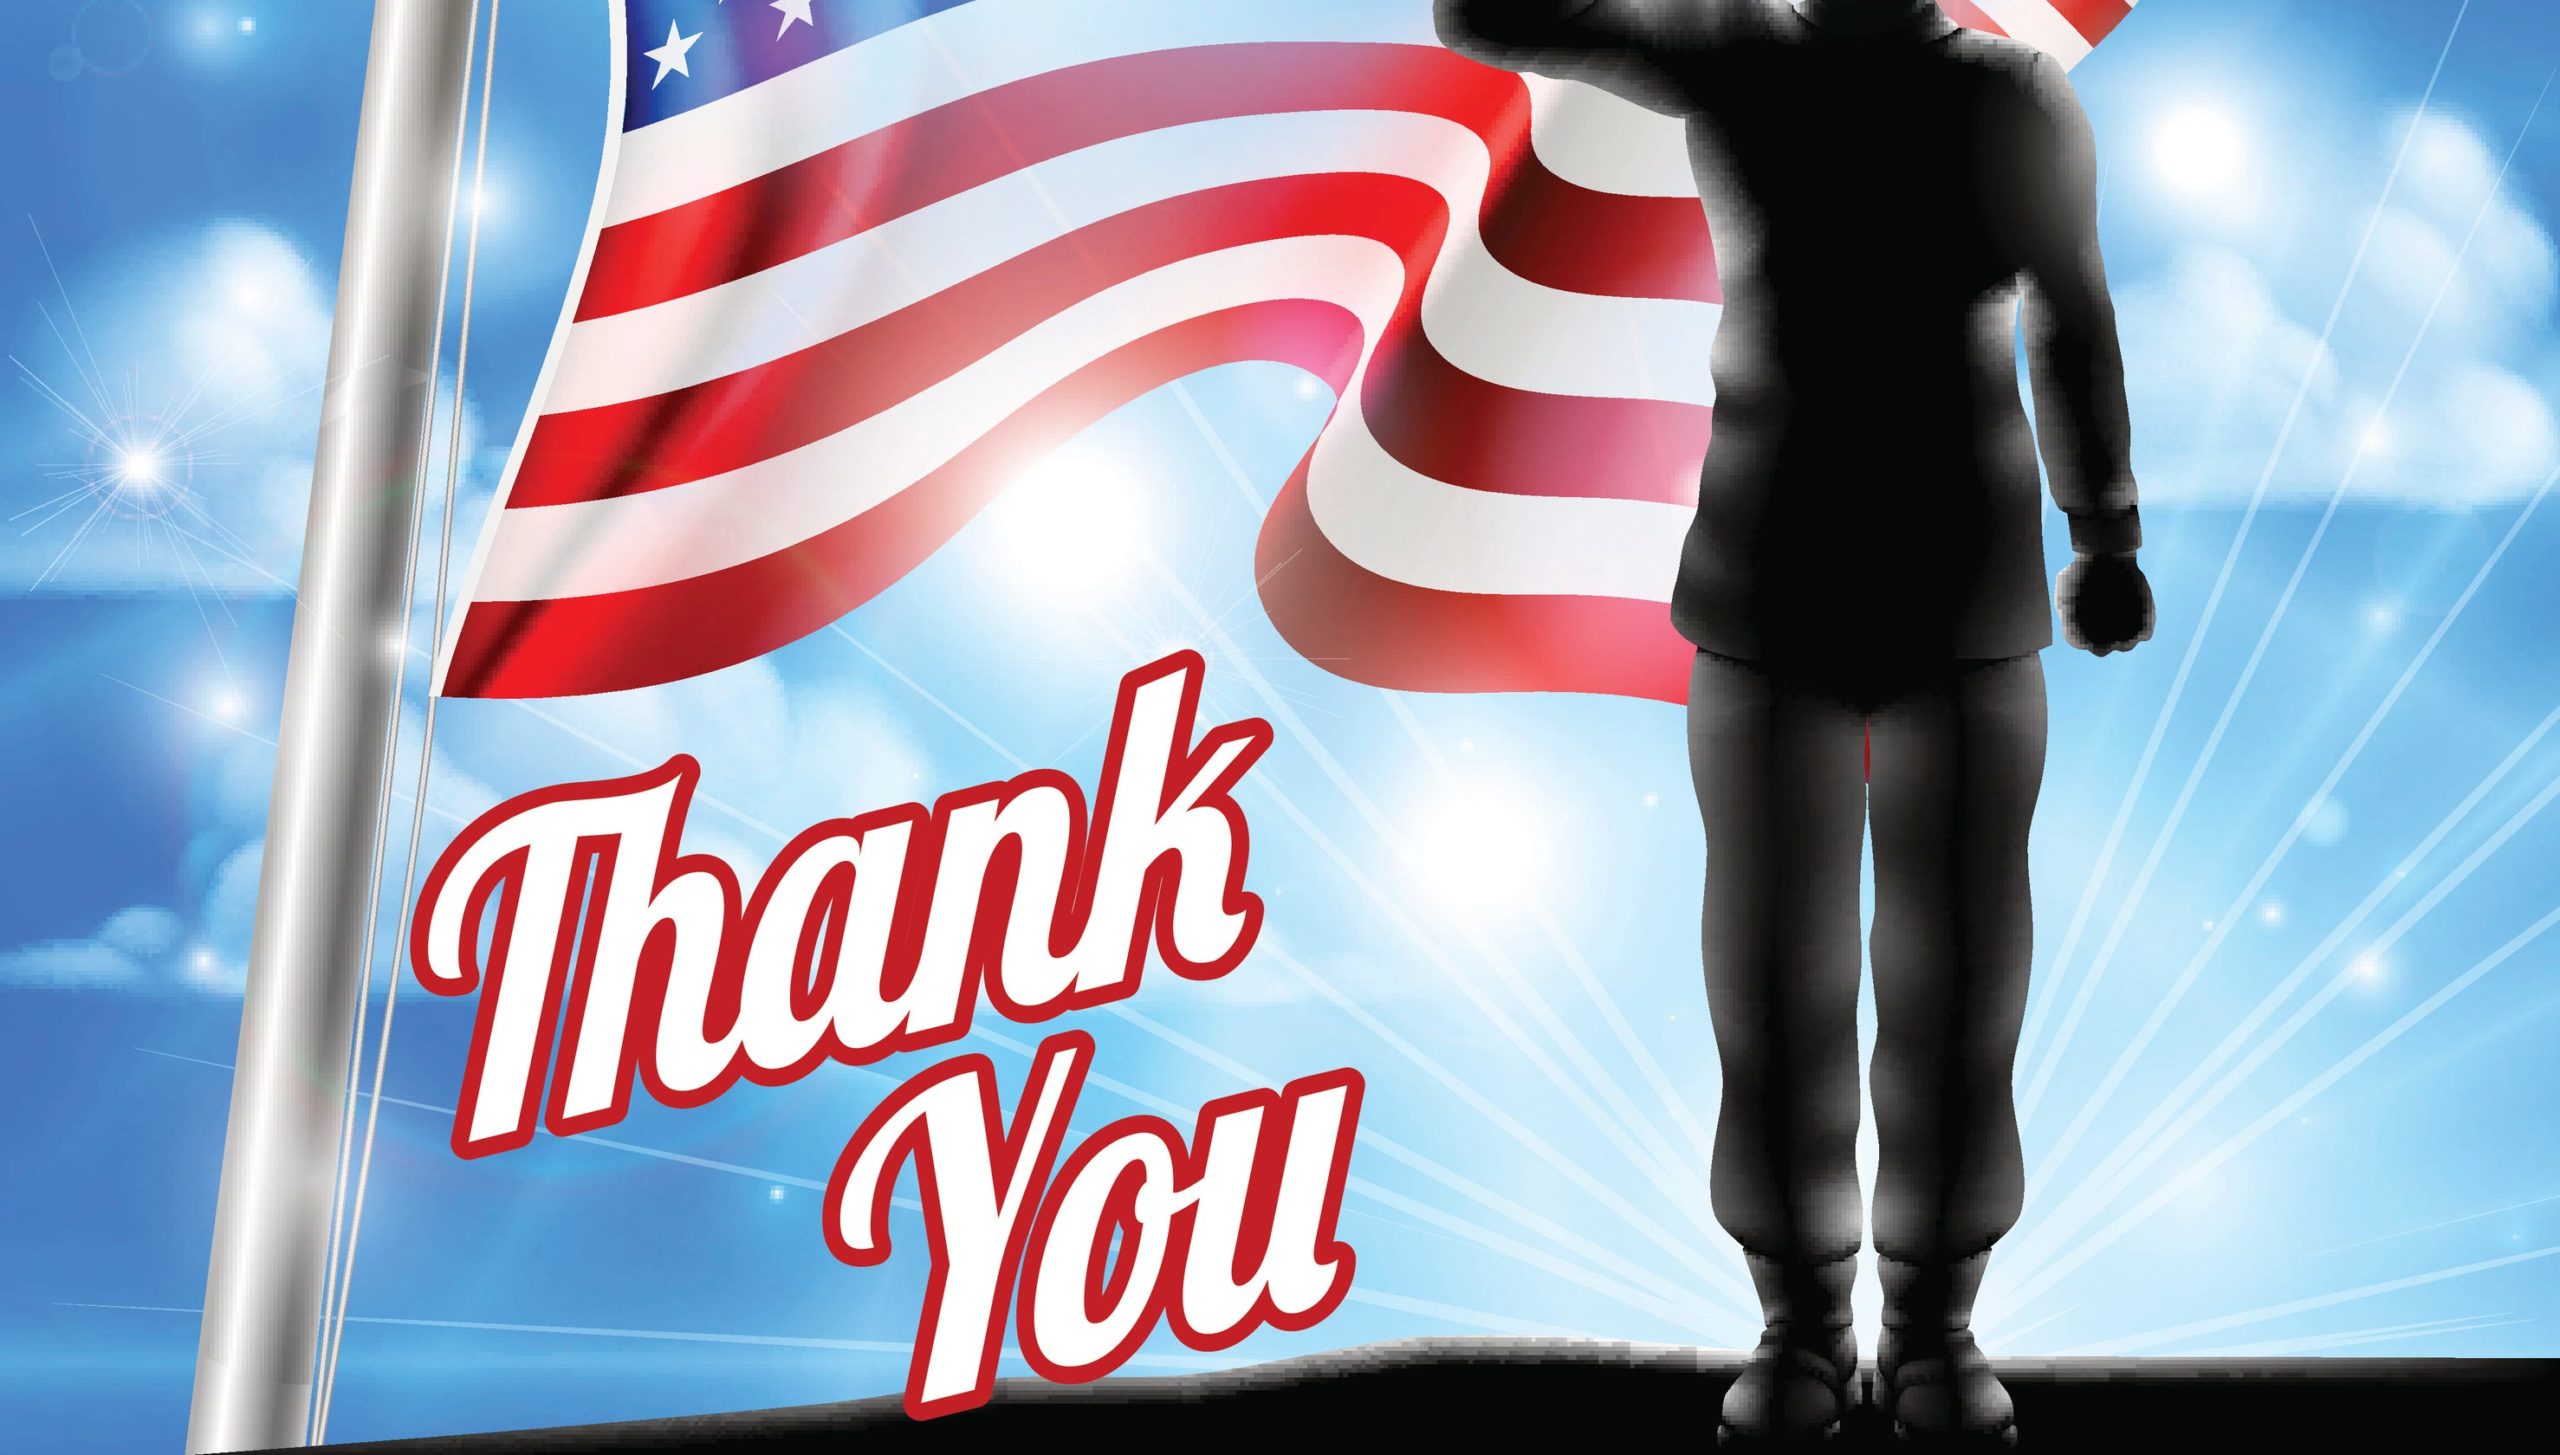 Thank You with Soldier Saluting American Flag